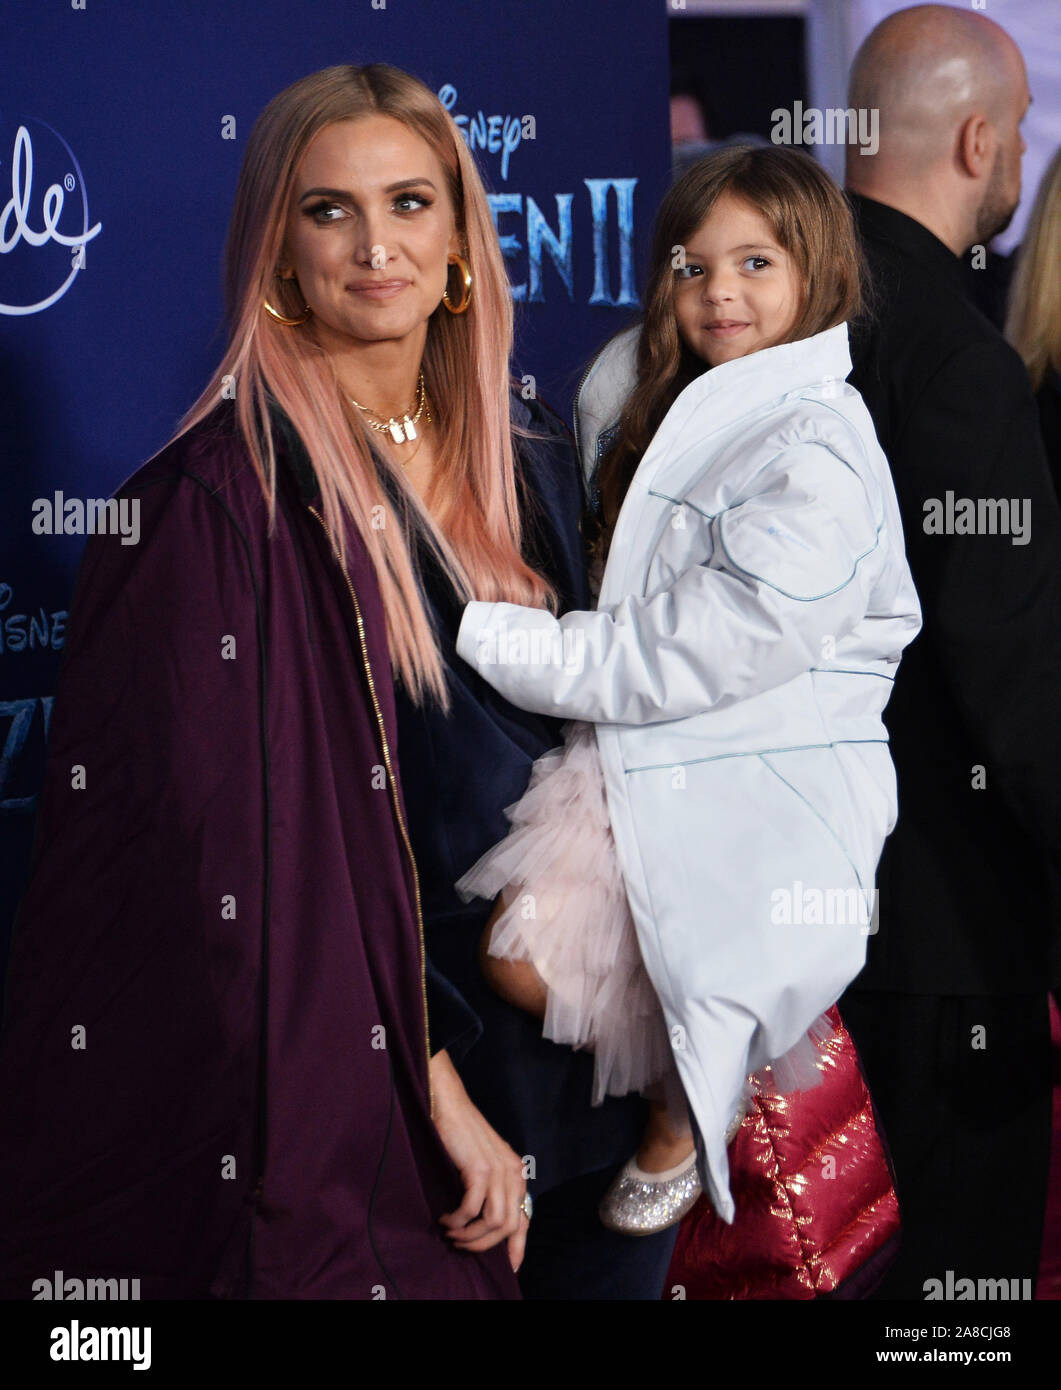 Los Angeles, United States. 07th Nov, 2019. Ashlee Simpson and her daughter Jagger Snow Ross attend the premiere of the animated musical comedy 'Frozen II' premiere at the Dolby Theatre in the Hollywood section of Los Angeles on Thursday, November 7, 2019. Storyline: Anna, Elsa, Kristoff, Olaf and Sven leave Arendelle to travel to an ancient, autumn-bound forest of an enchanted land. They set out to find the origin of Elsa's powers in order to save their kingdom. Photo by Jim Ruymen/UPI Credit: UPI/Alamy Live News Stock Photo